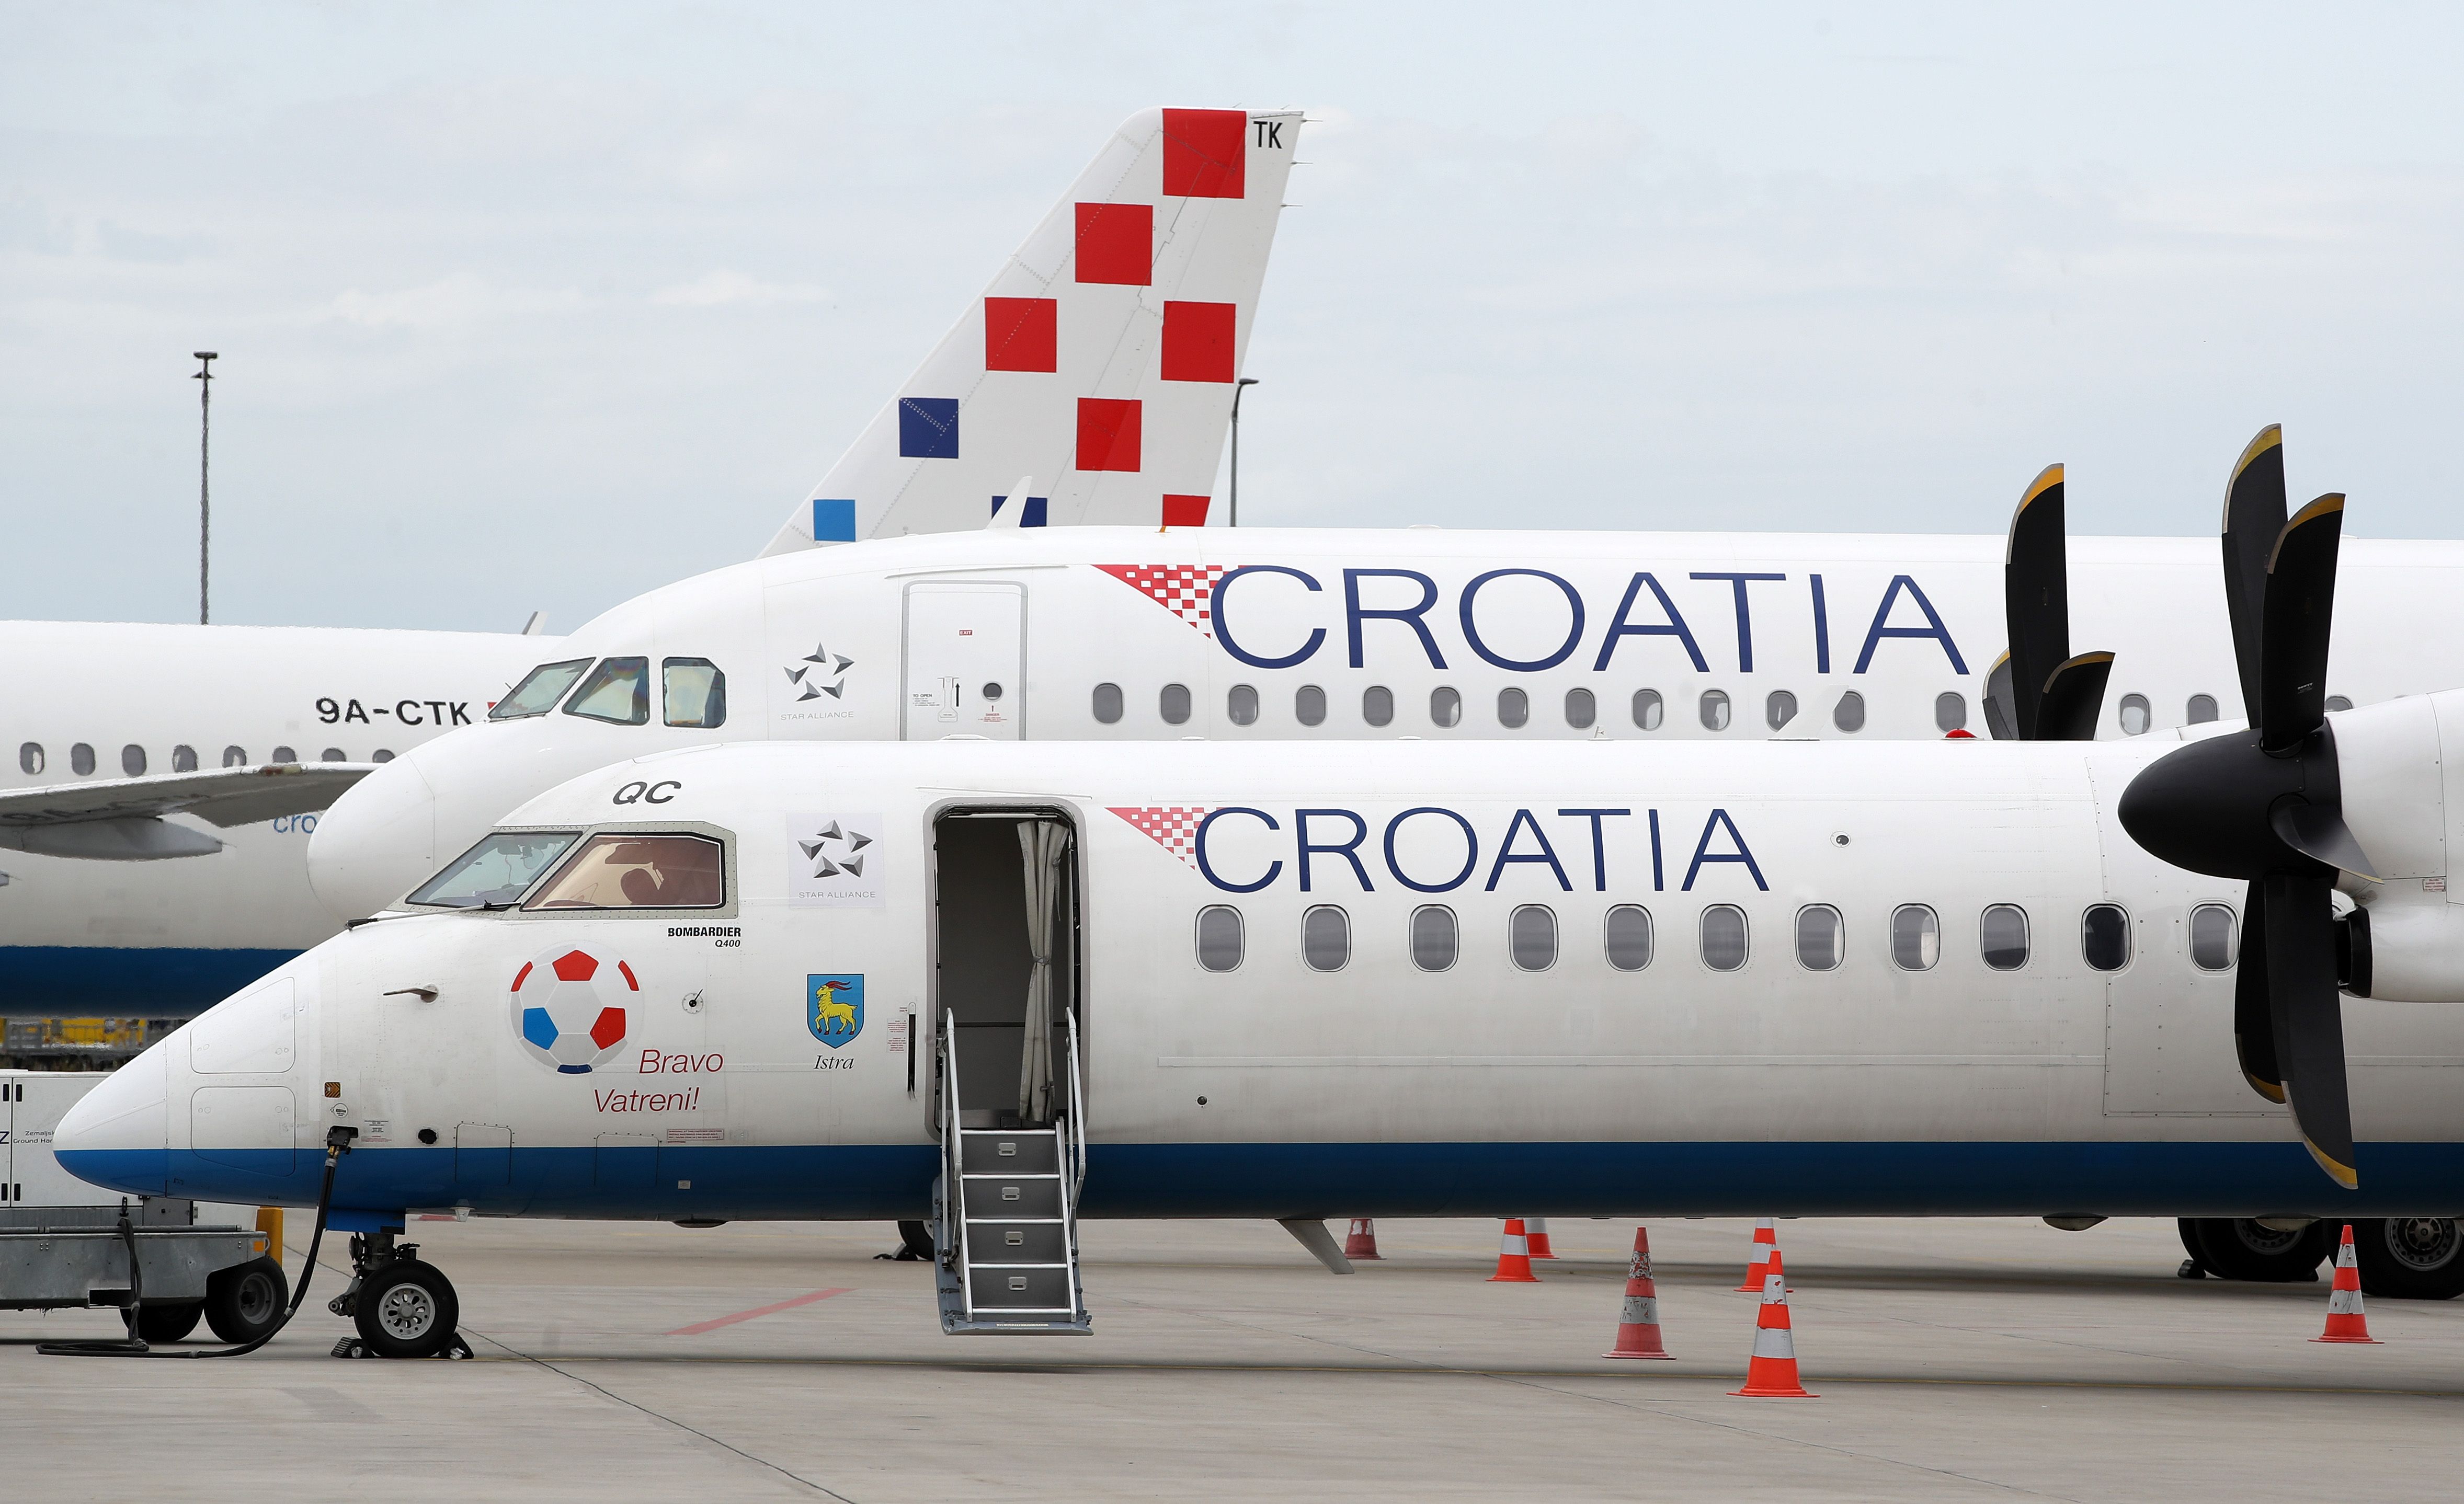 Planes of Croatia Airlines are parked at Zagreb International Airport Croatia